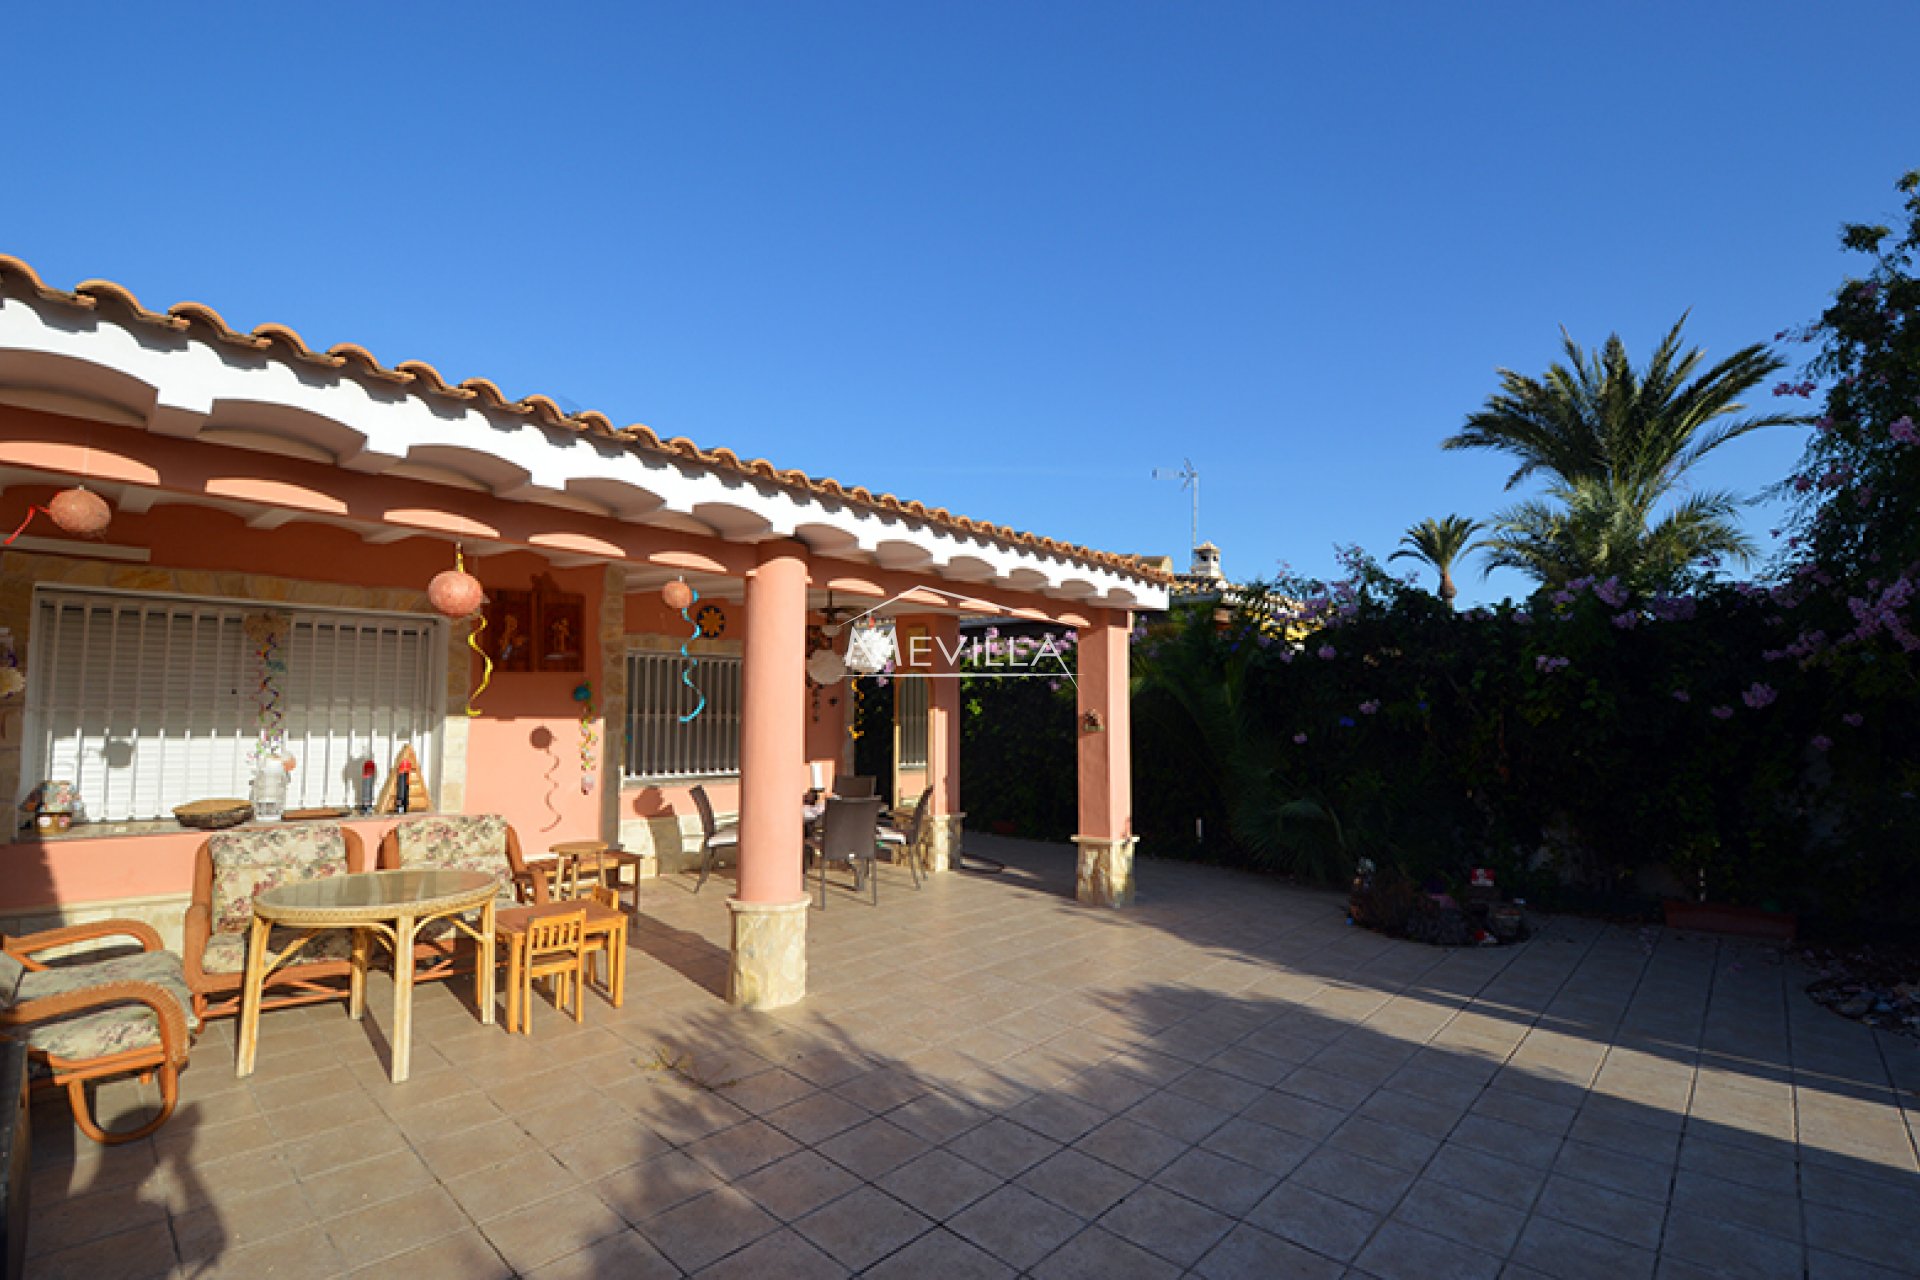 For sale a beautiful semi-detached house in Campoamor